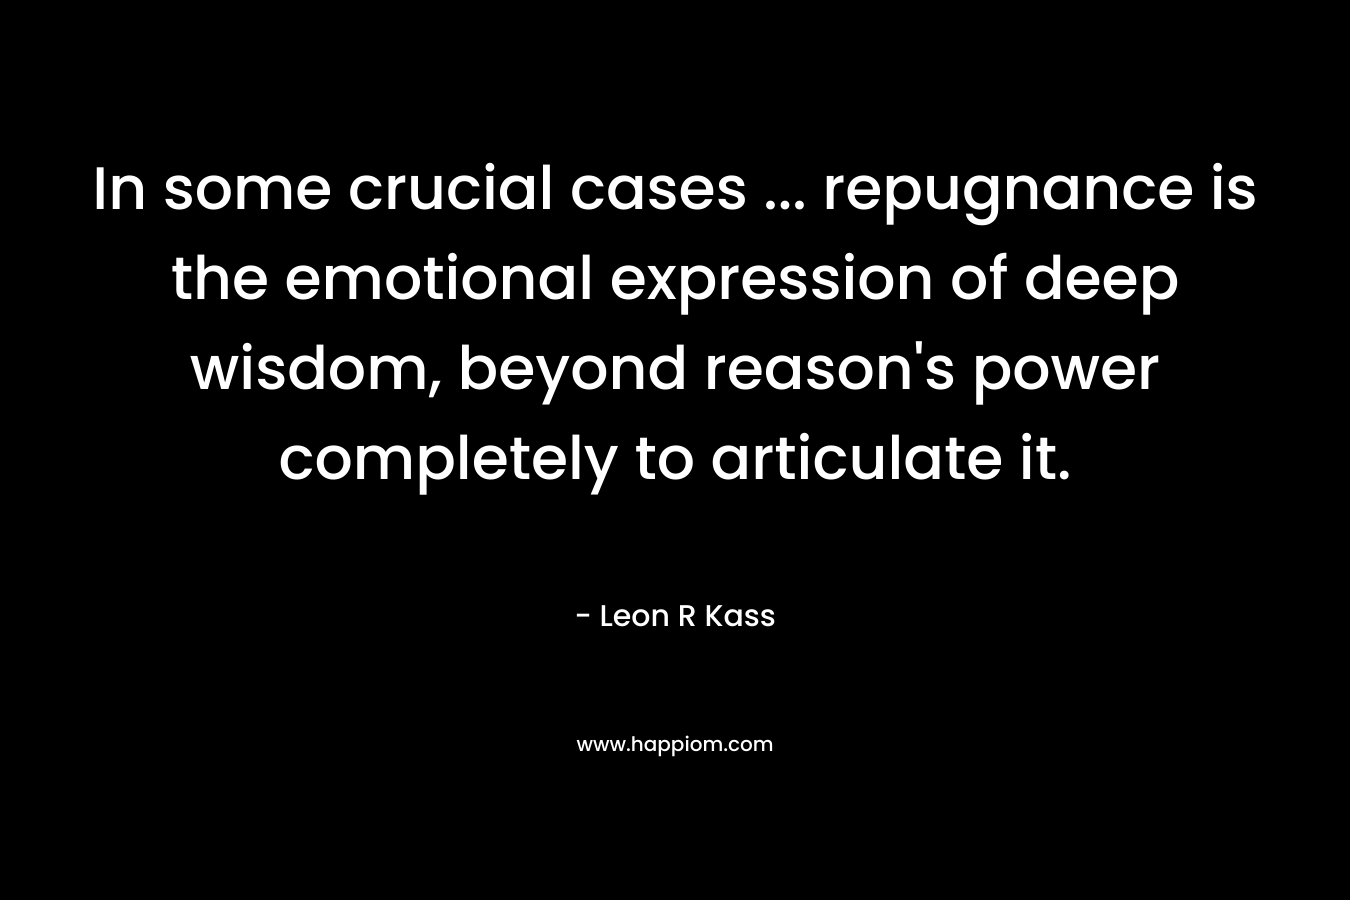 In some crucial cases ... repugnance is the emotional expression of deep wisdom, beyond reason's power completely to articulate it.